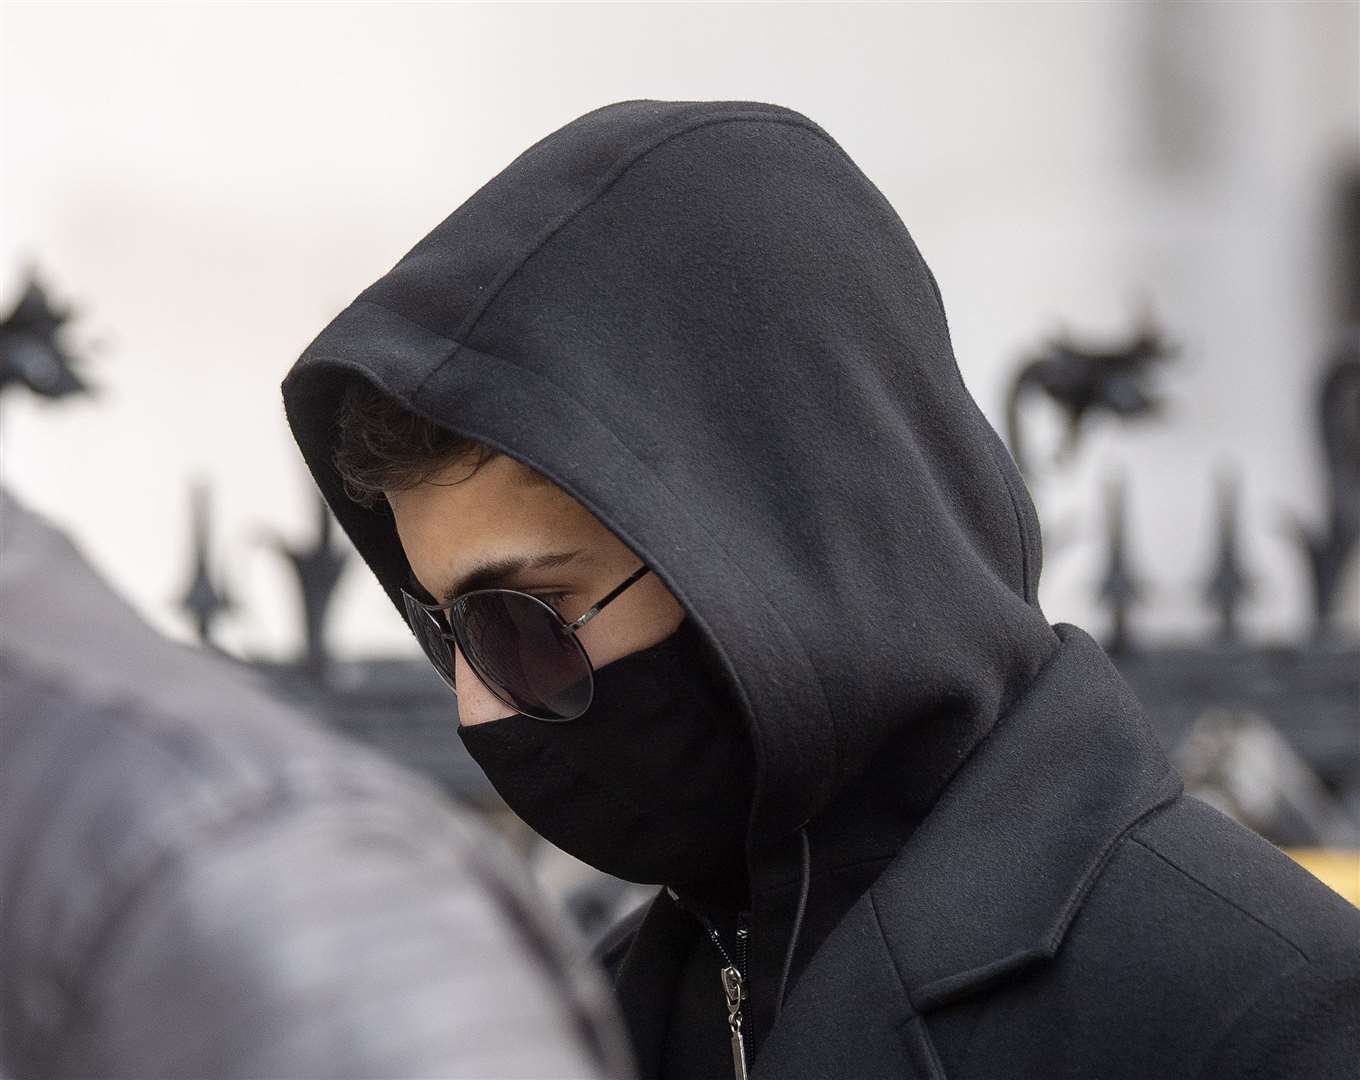 Syrian schoolboy Jamal Hijazi, then 17, attended the trial at the Royal Courts of Justice in London (Victoria Jones/PA)